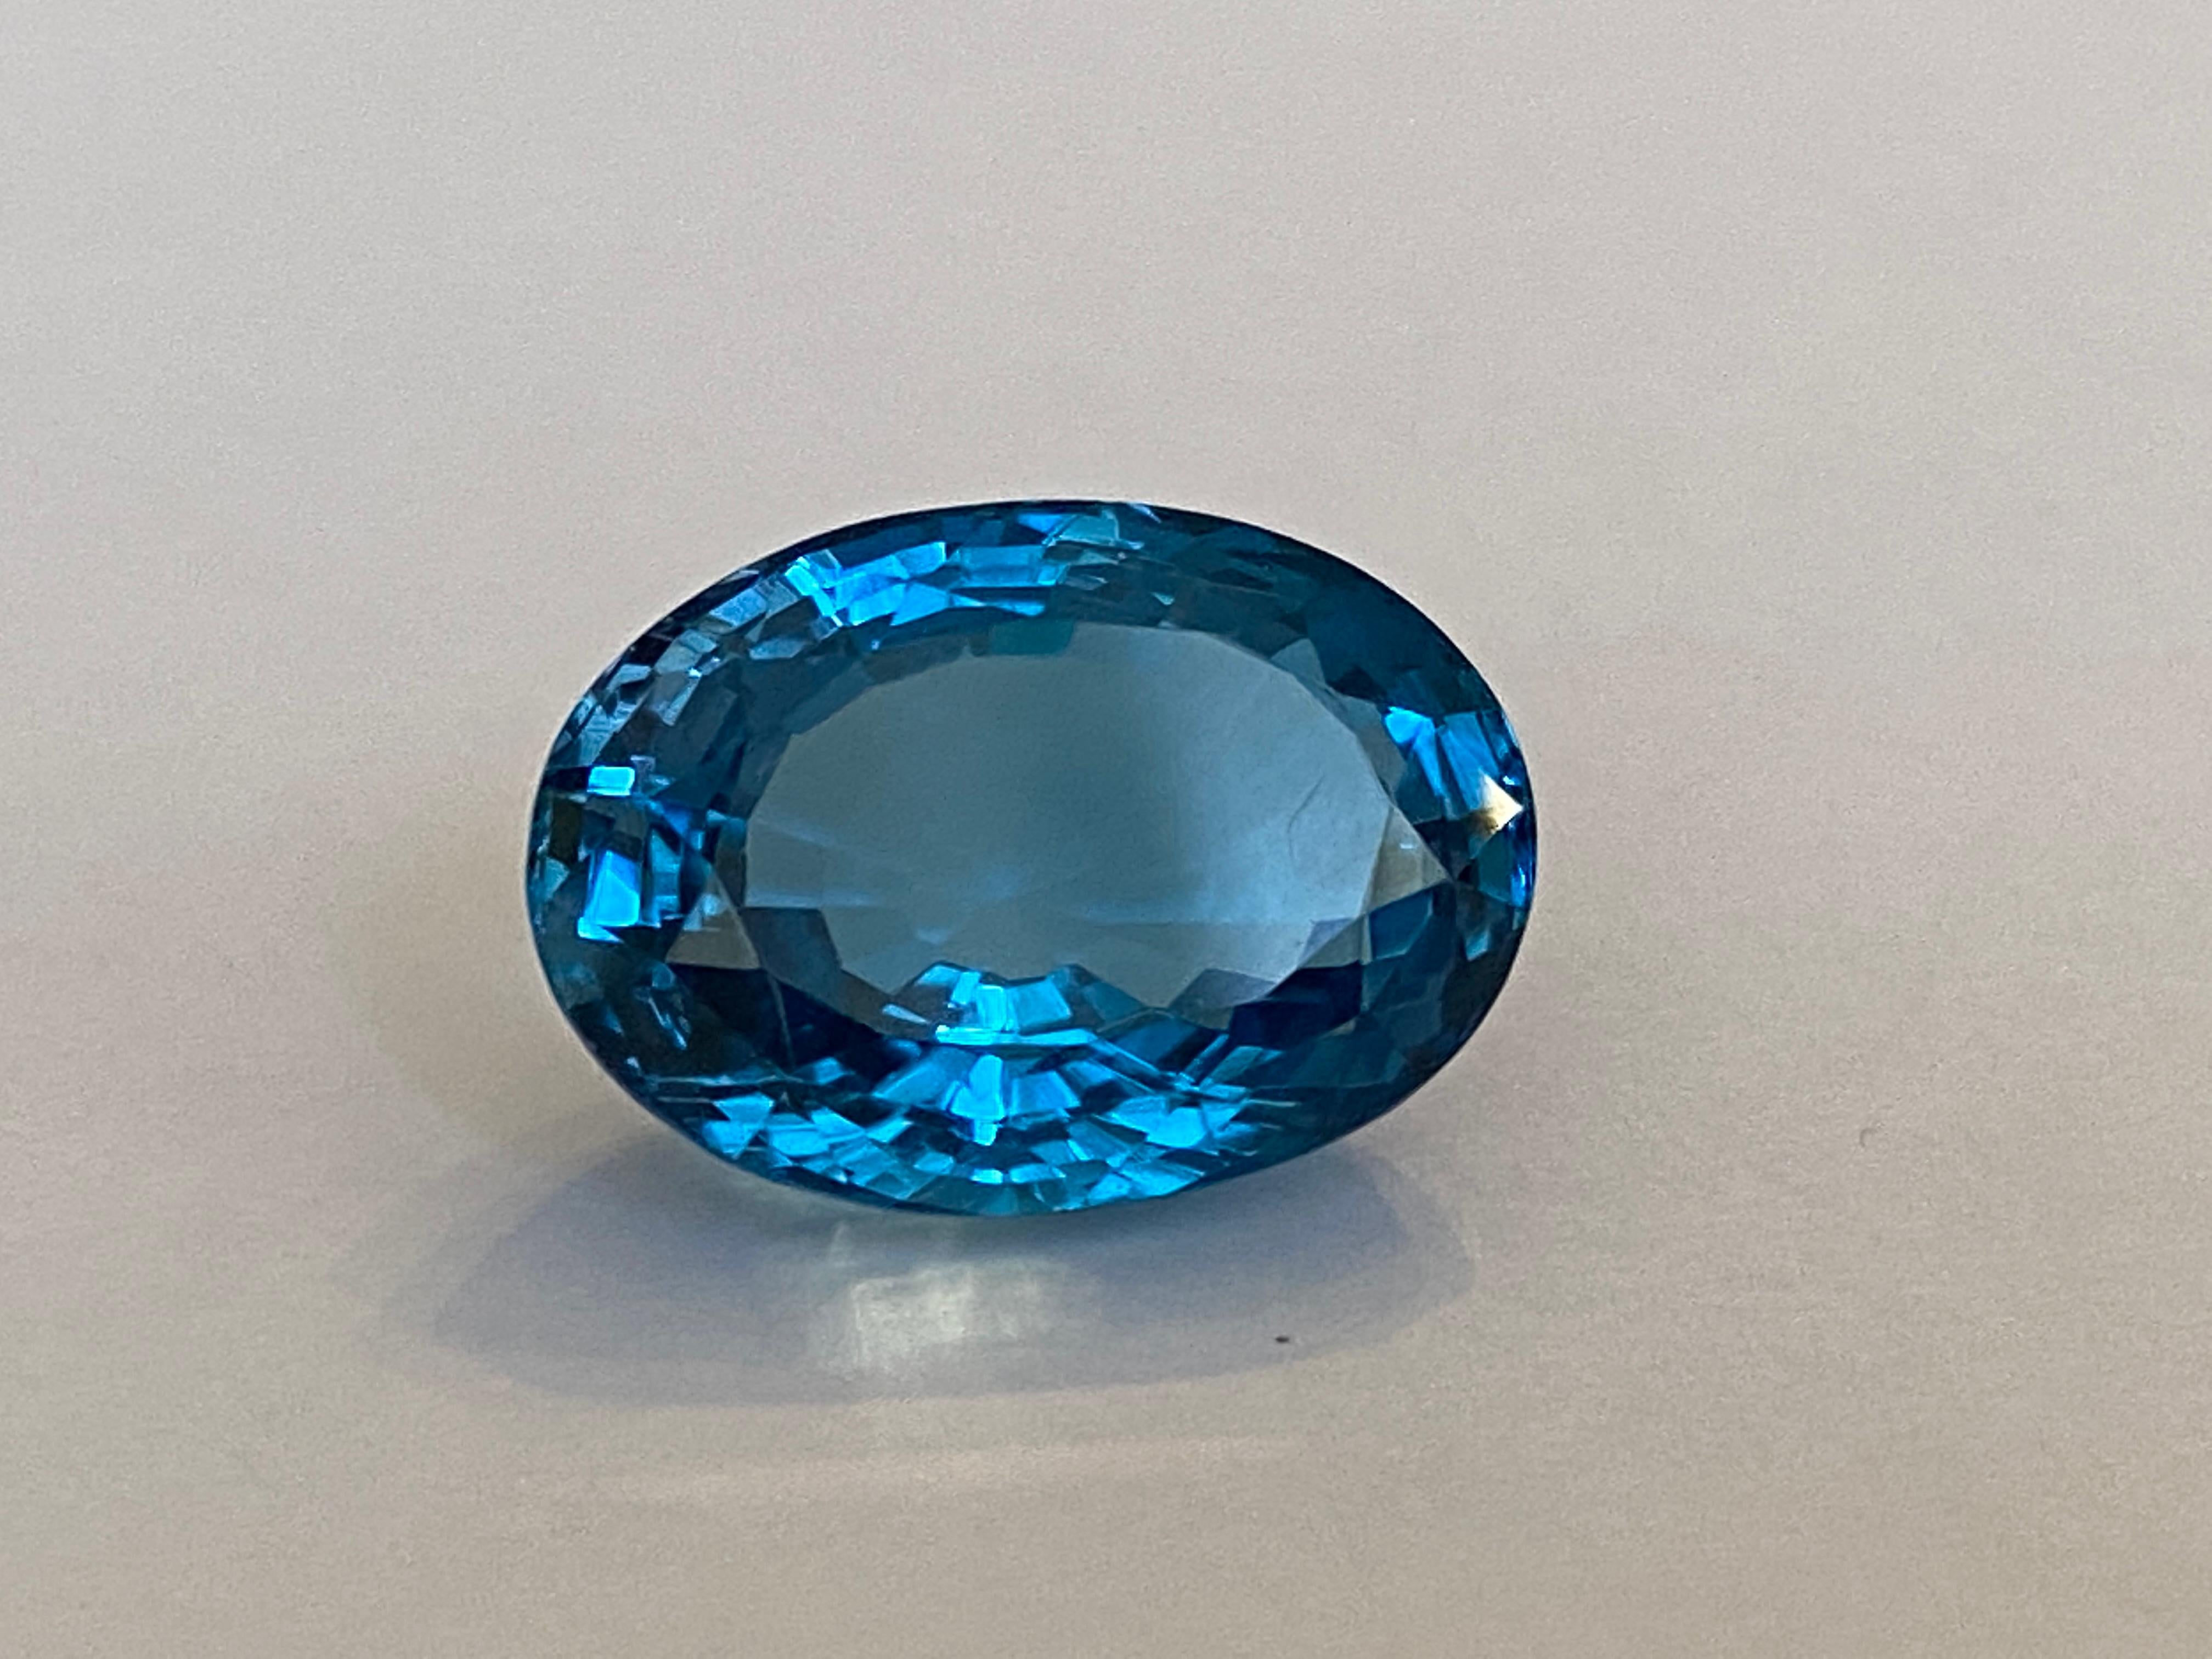 Oval Cut Natural London Blue Topaz Gemstone21.23 Ct Oval Mixed Cut. For Sale